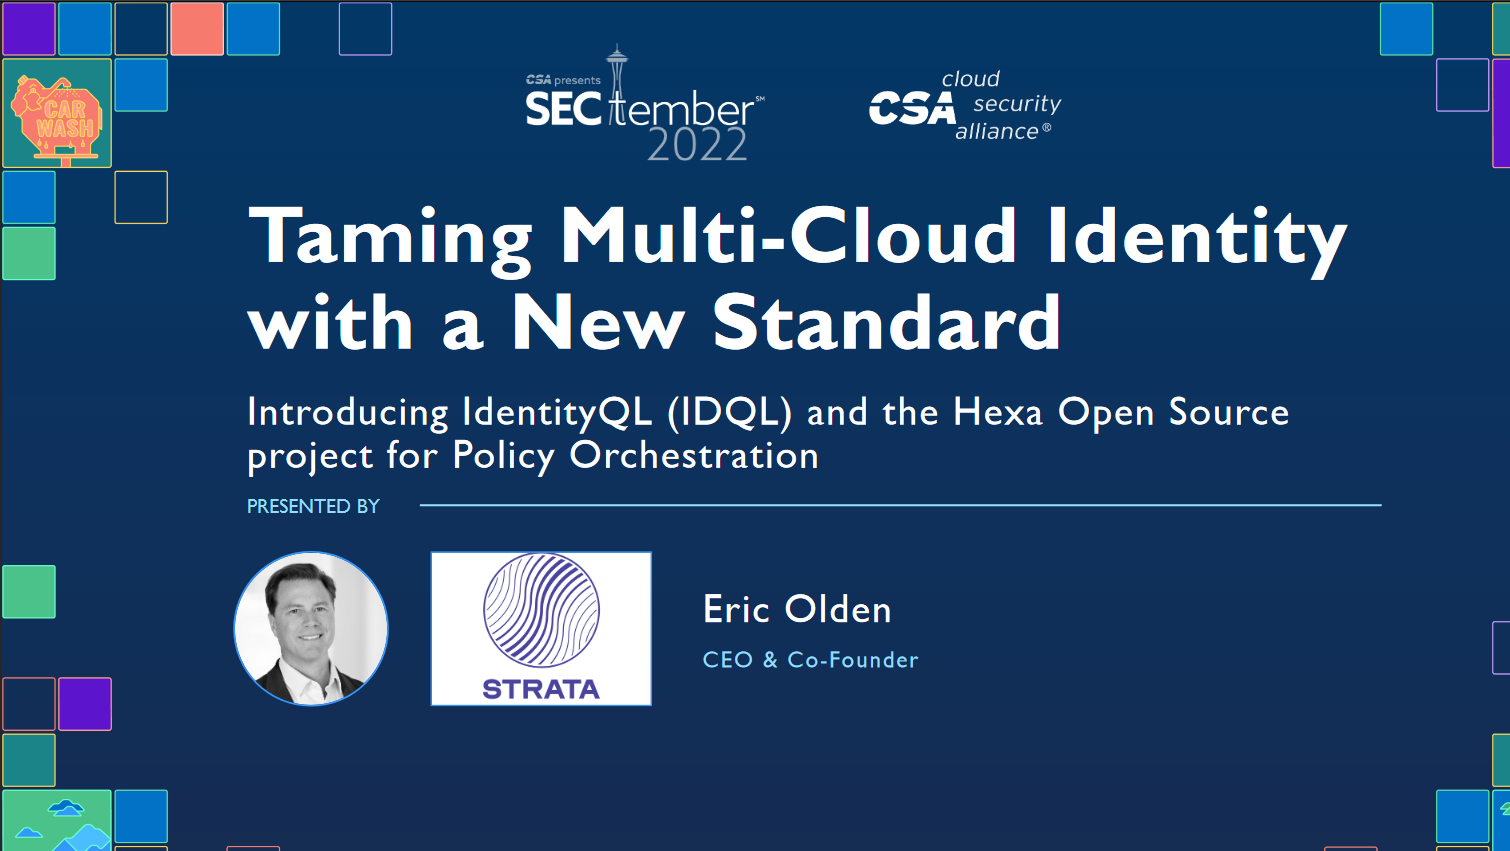 Taming Multi-Cloud Identity with a New Standard